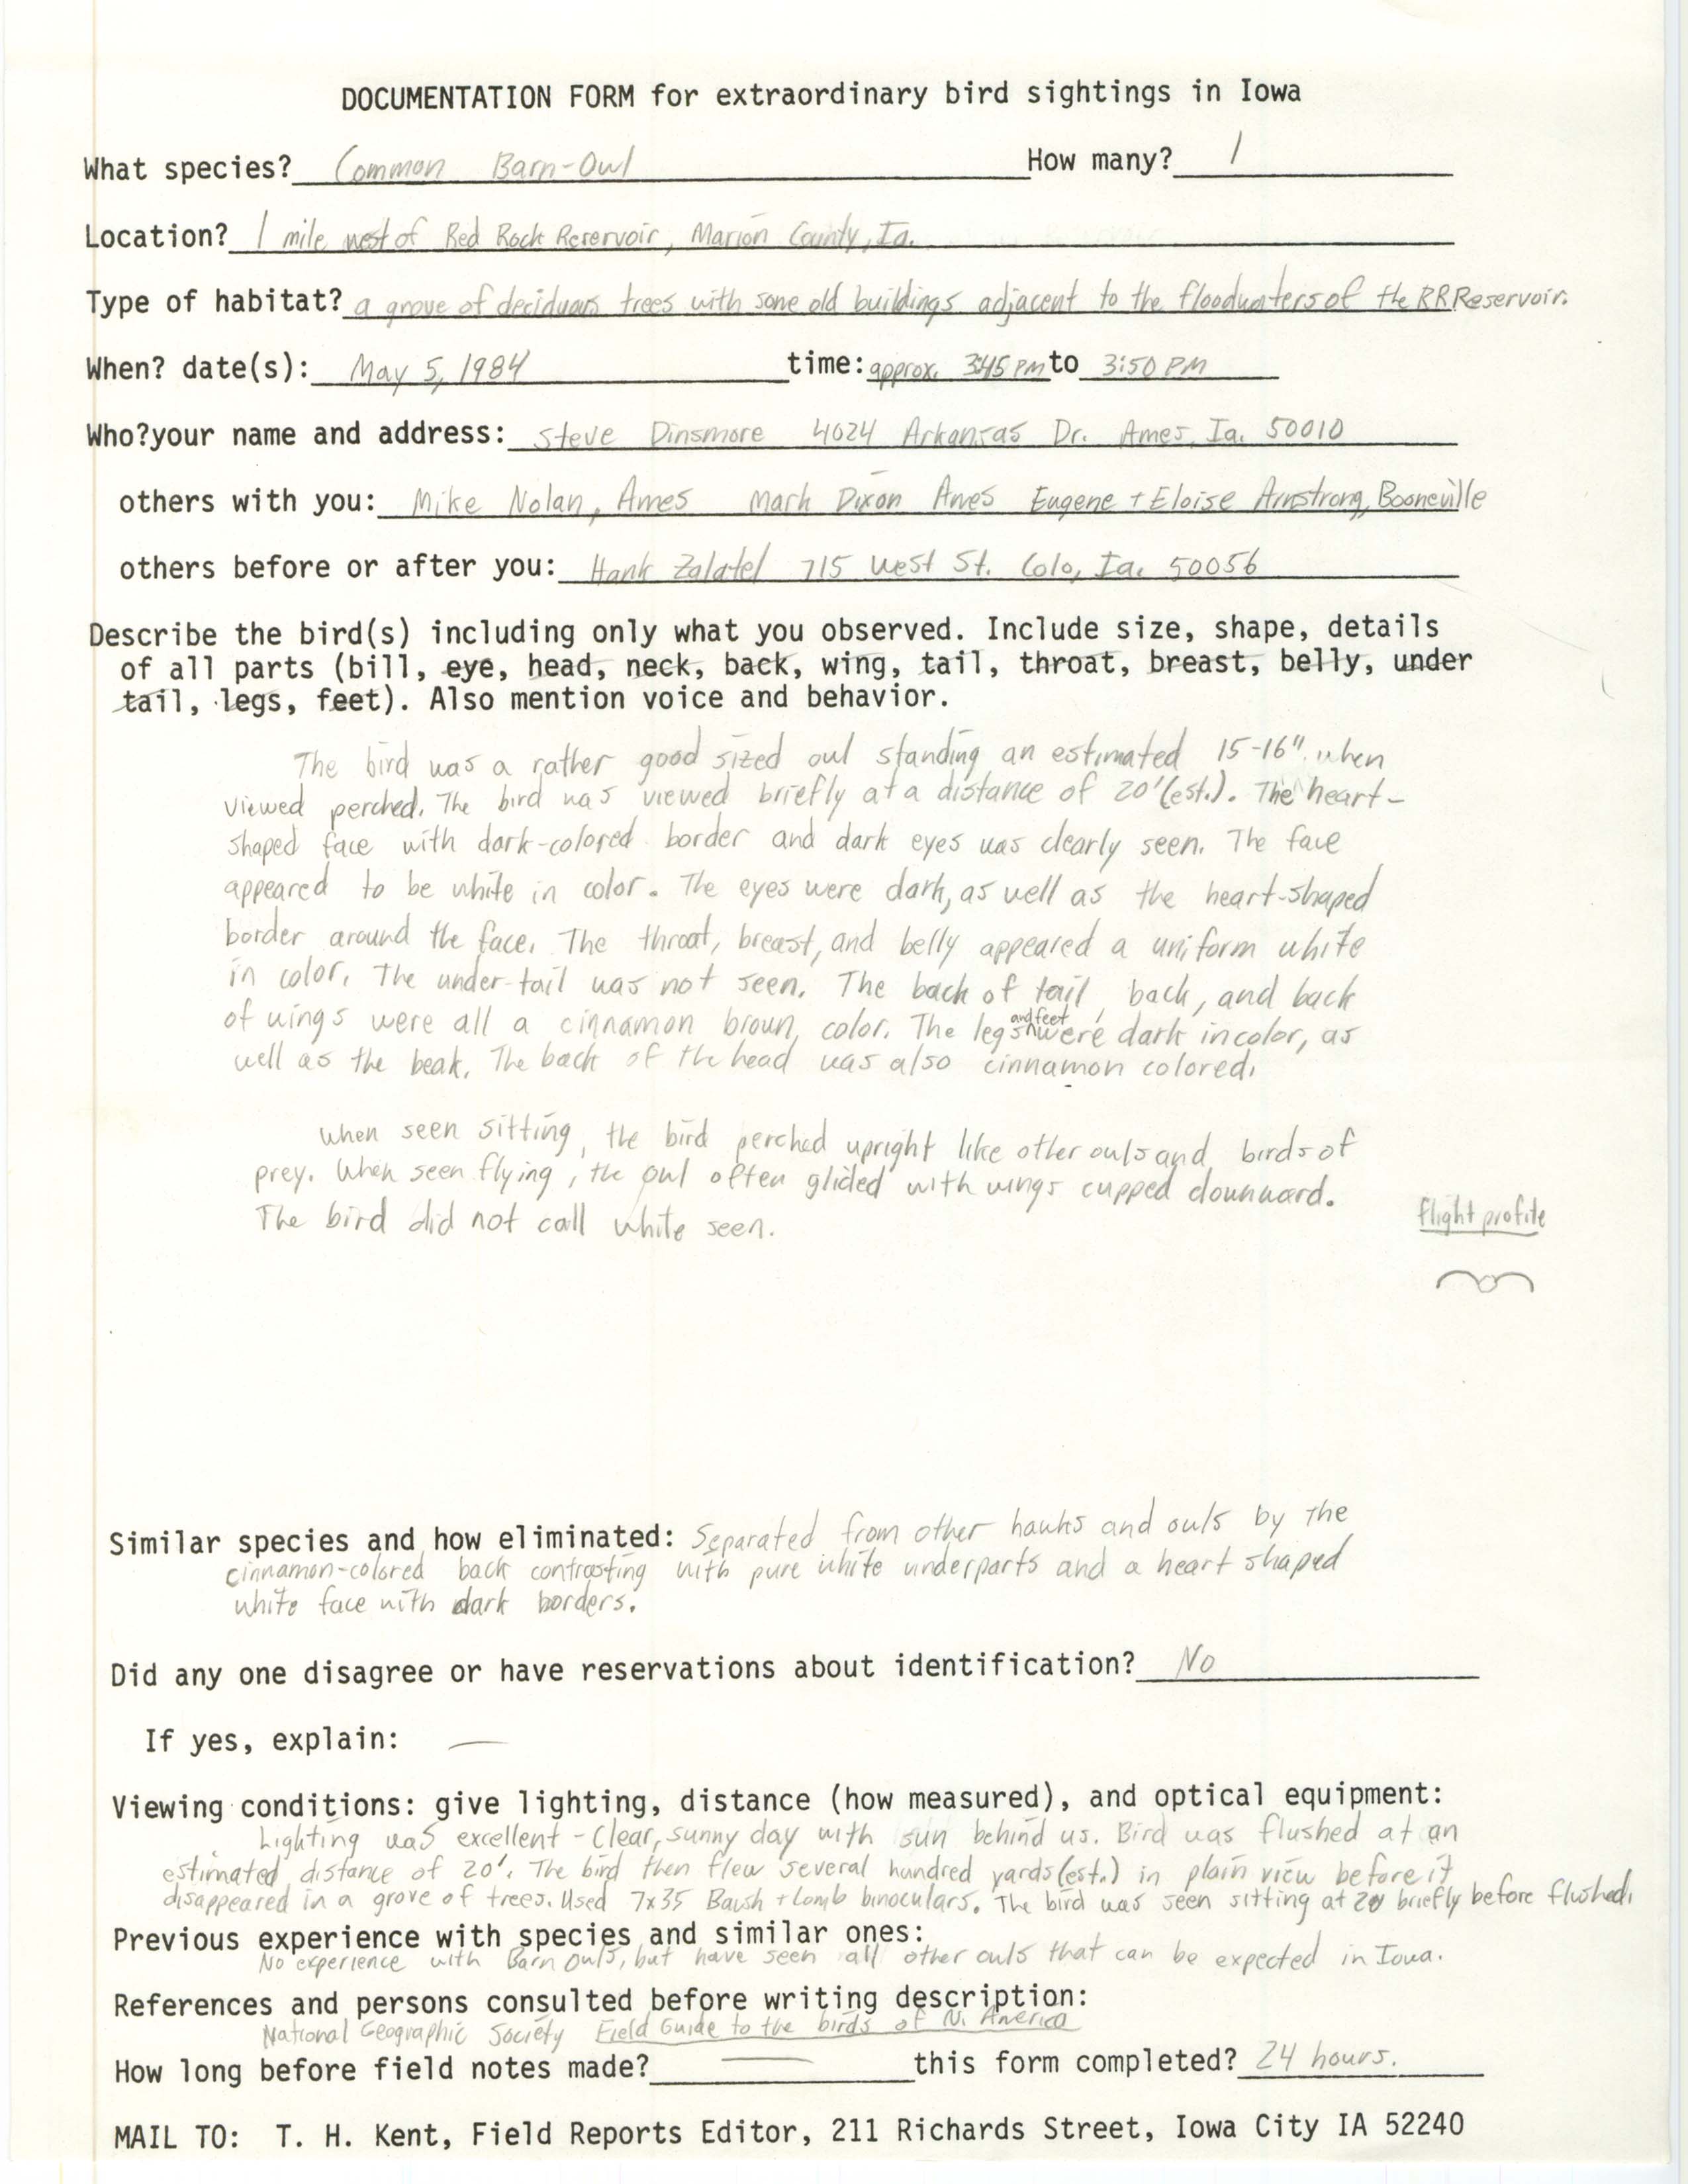 Rare bird documentation form for Common Barn Owl west of Red Rock Reservoir, 1984